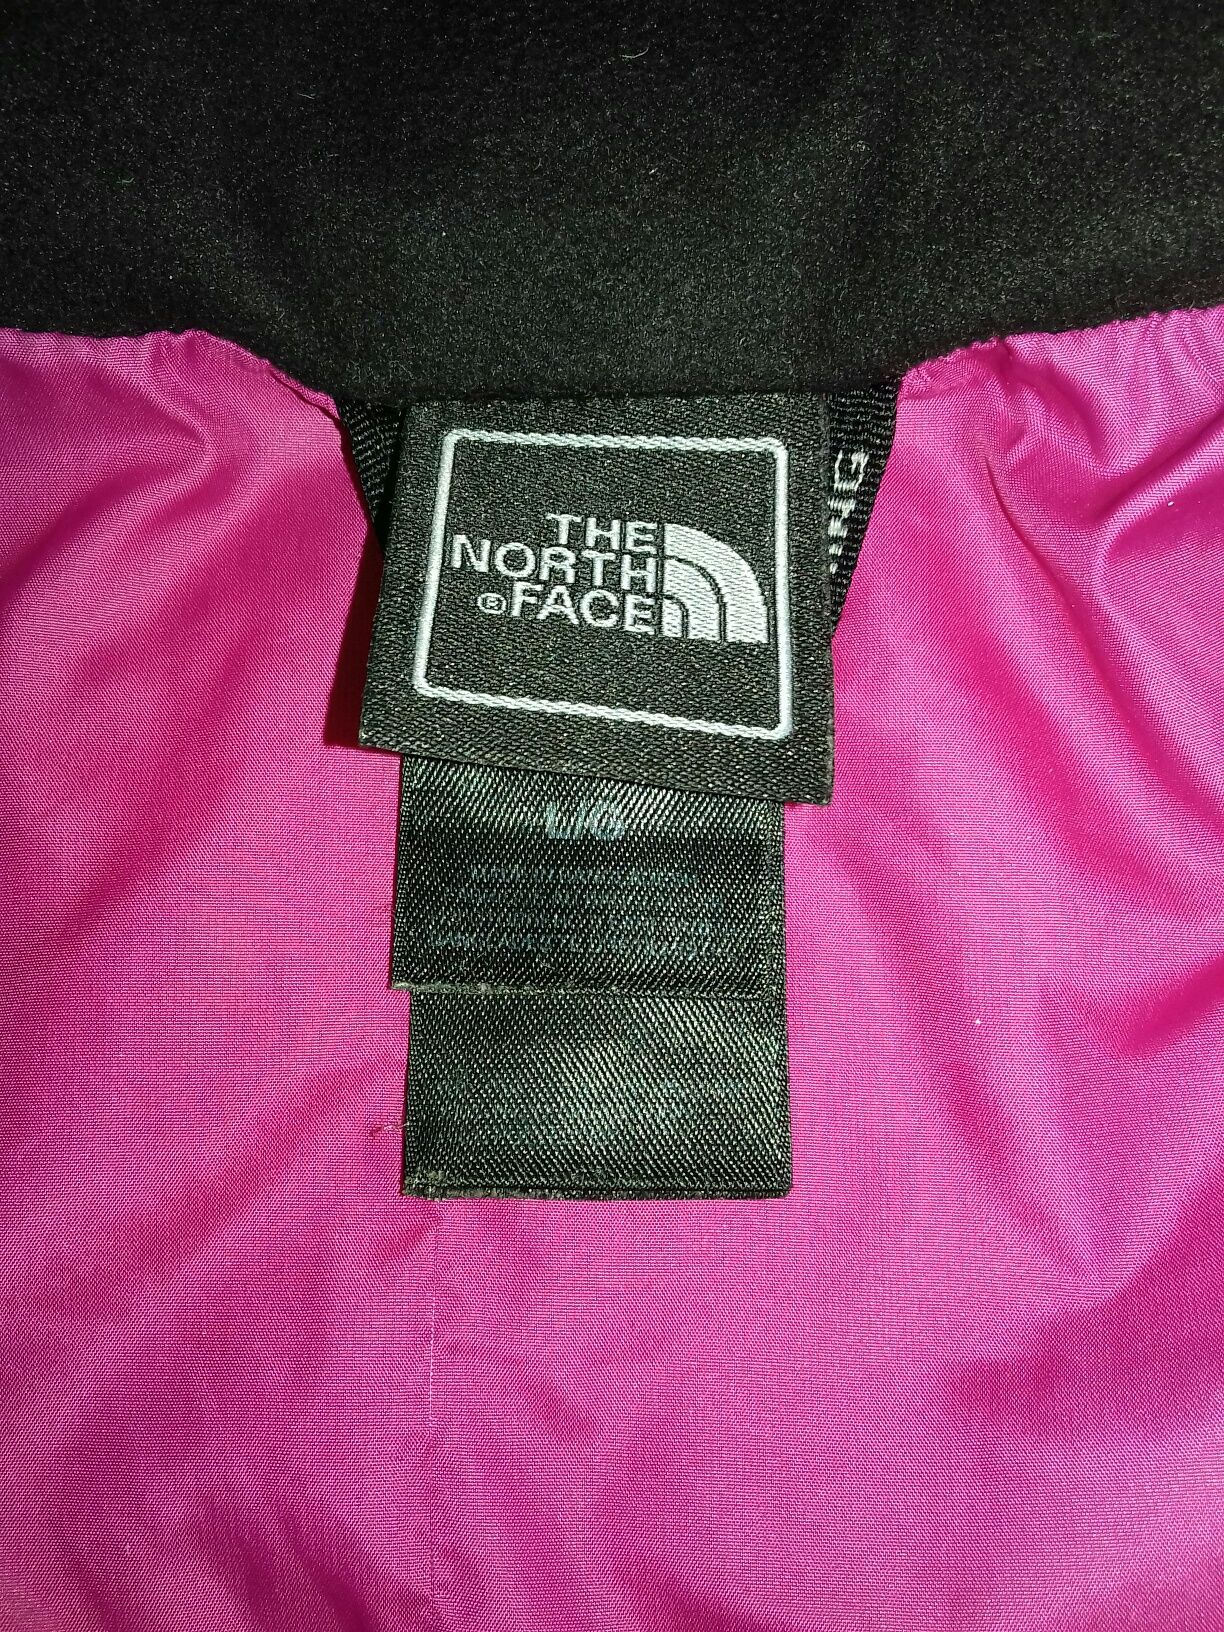 Дамско яке The North Face размер L/G